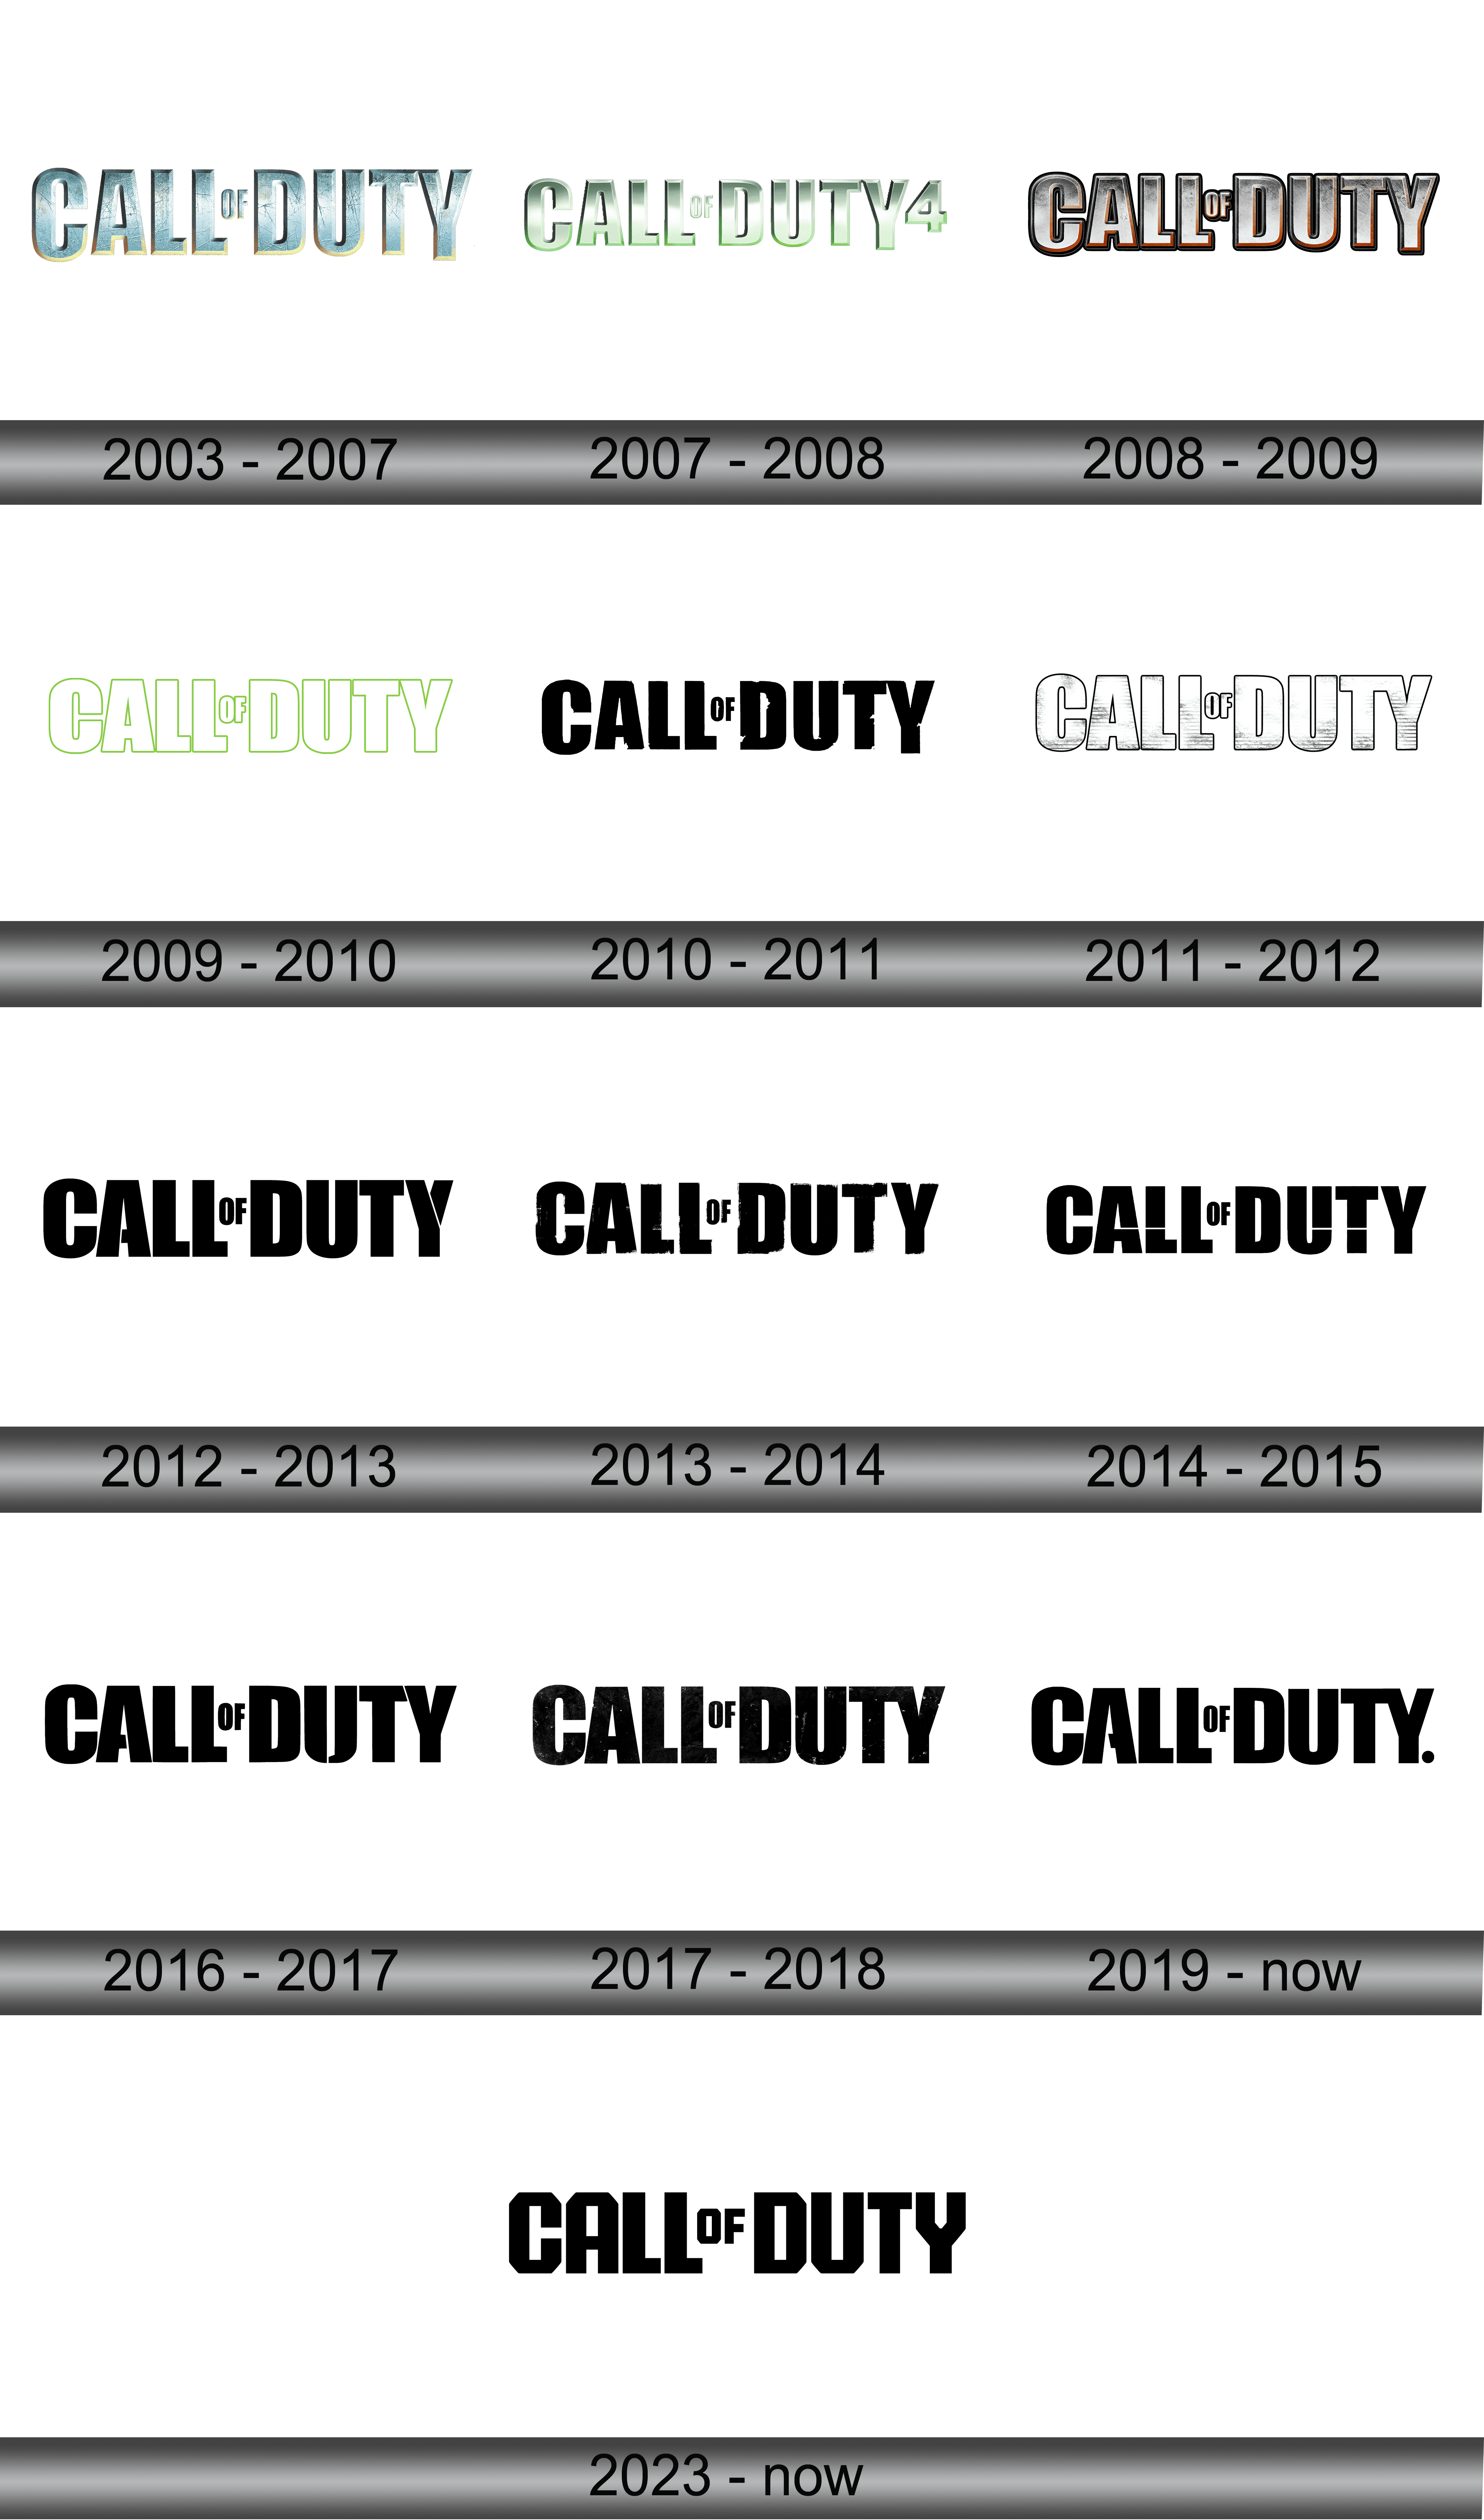 Call Of Duty Logo PNG Images, Transparent Call Of Duty Logo Image Download  - PNGitem